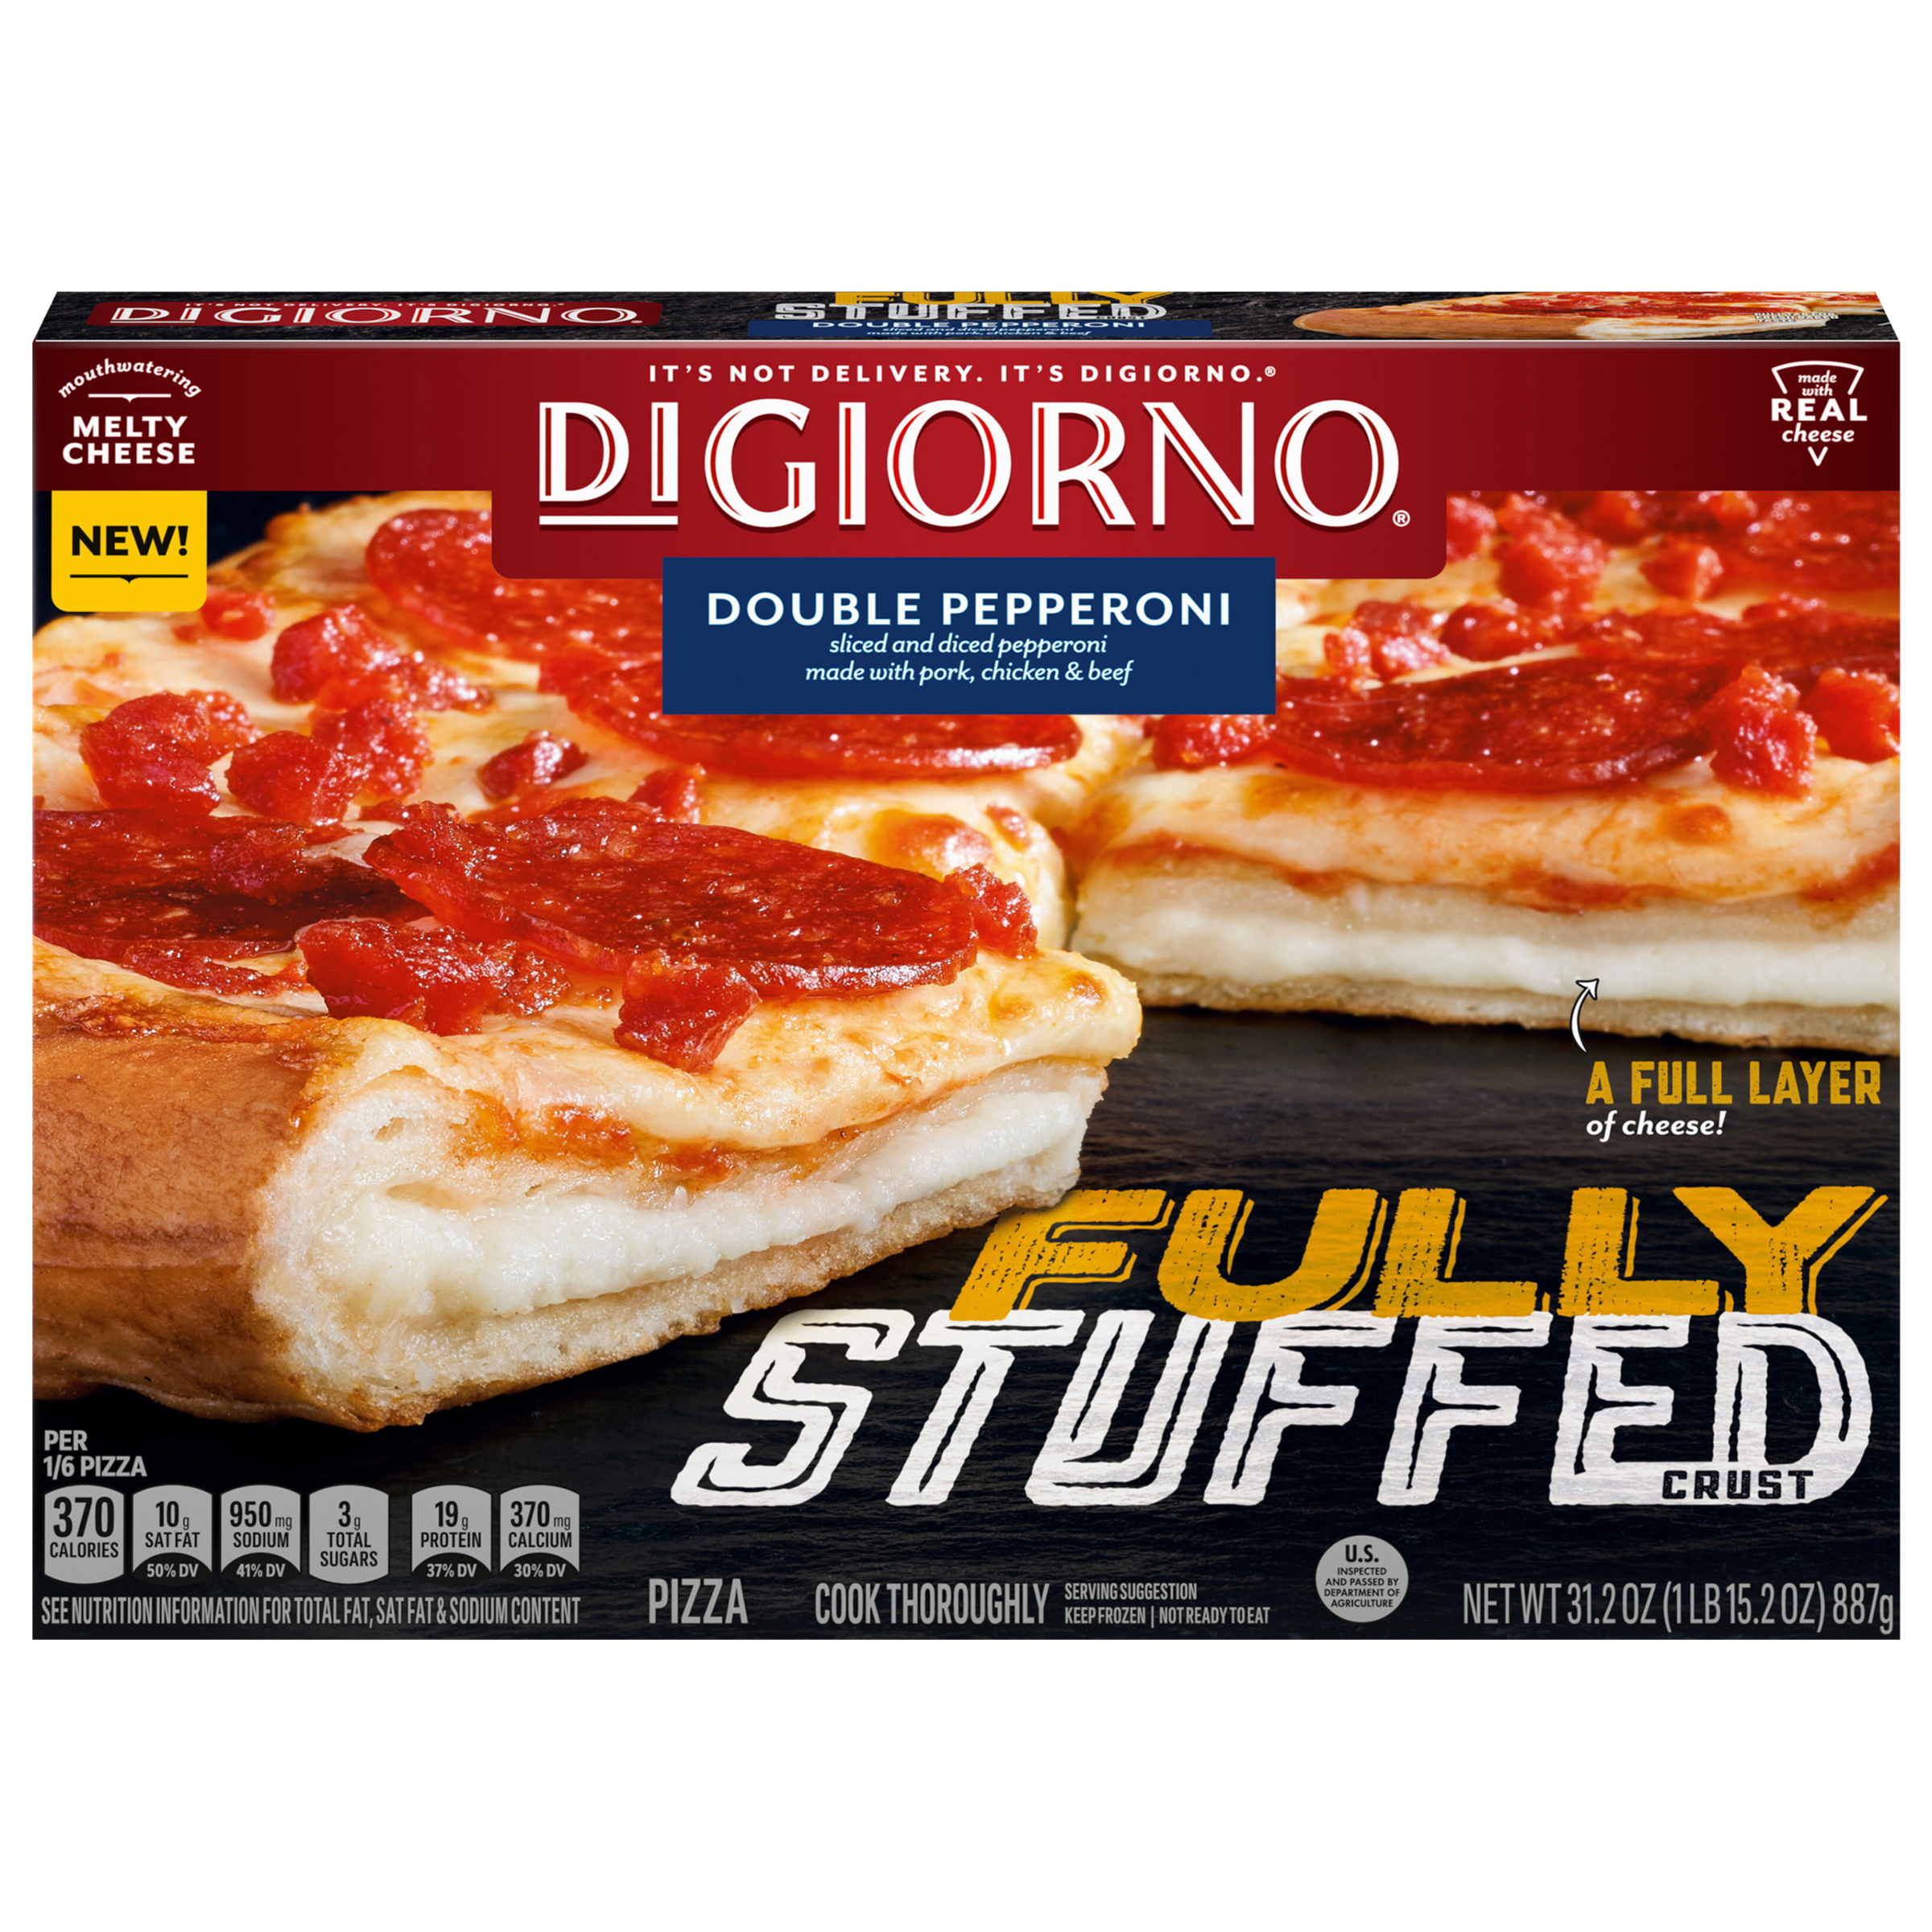 How Many Calories in a Digiorno Cheese Pizza